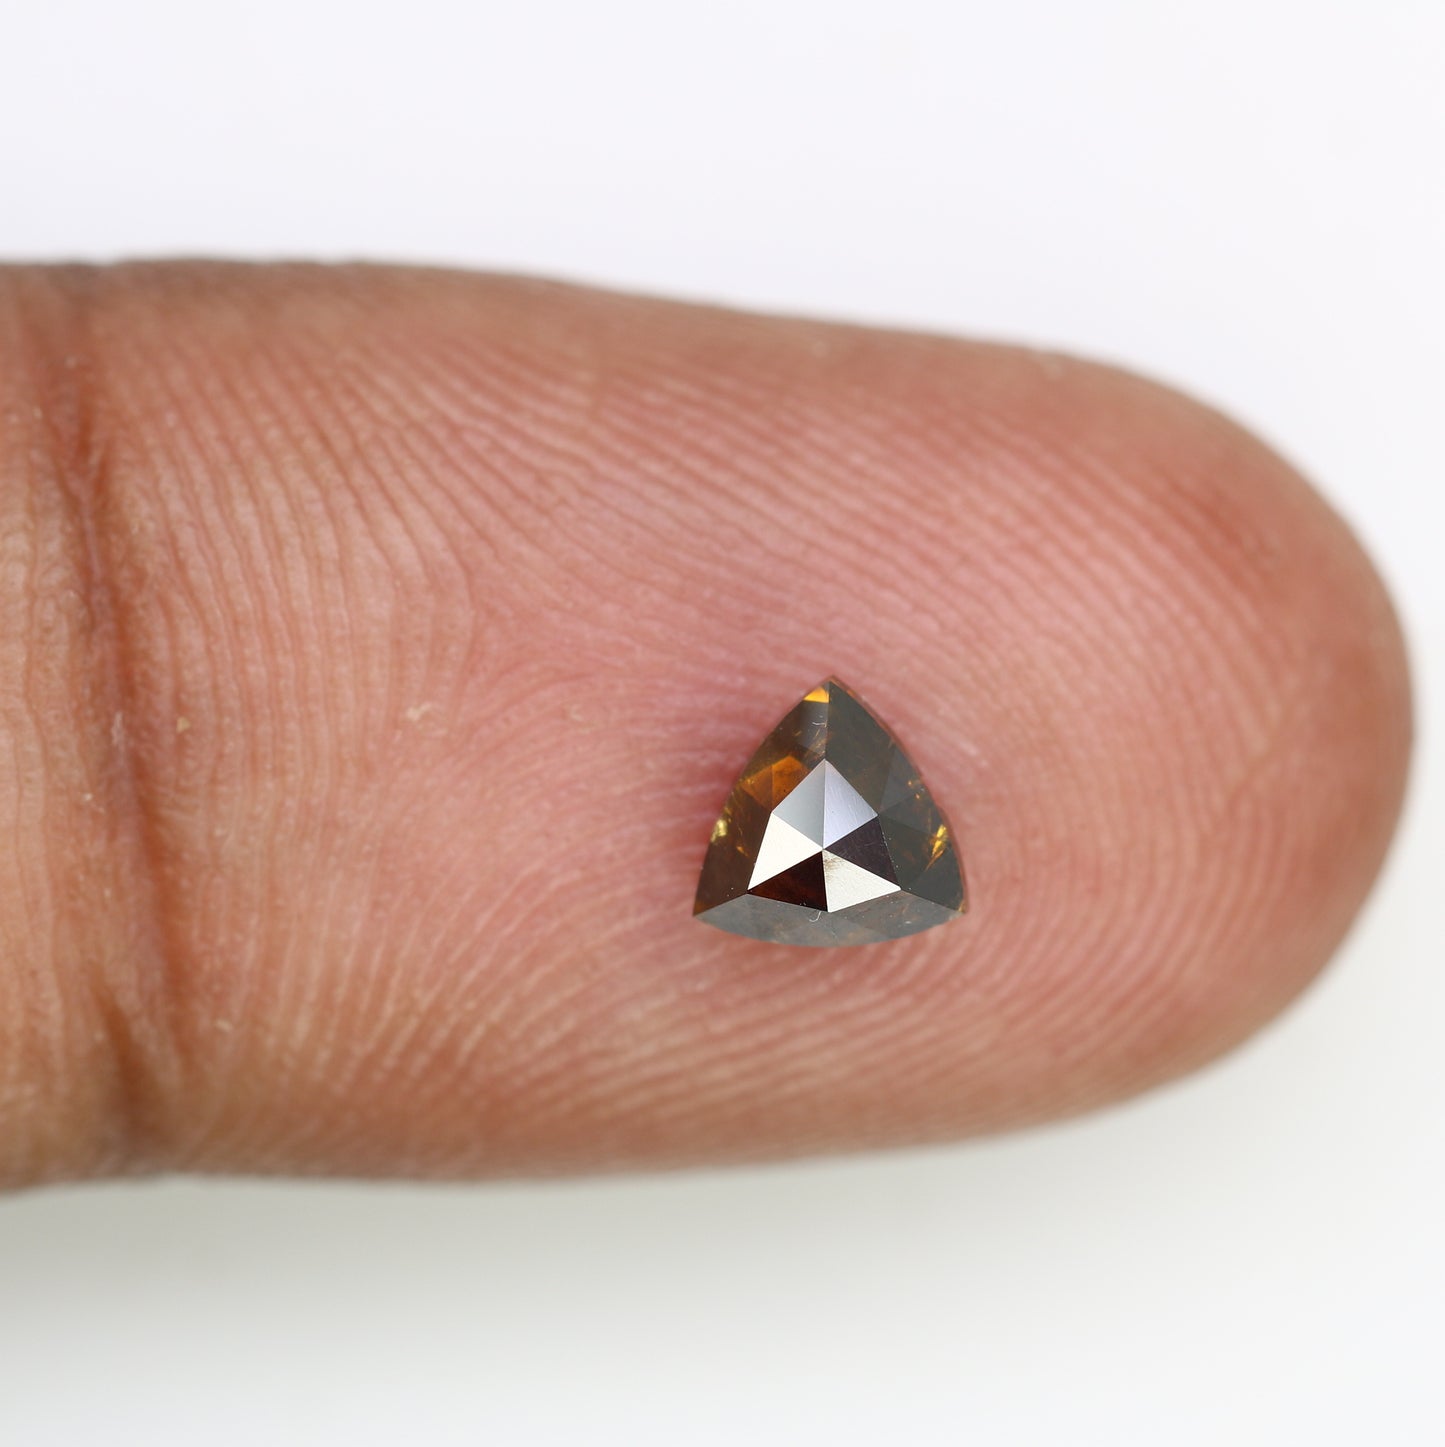 0.73 Carat 5.3 MM Triangle Shaped Fancy Brown Diamond For Engagement Ring